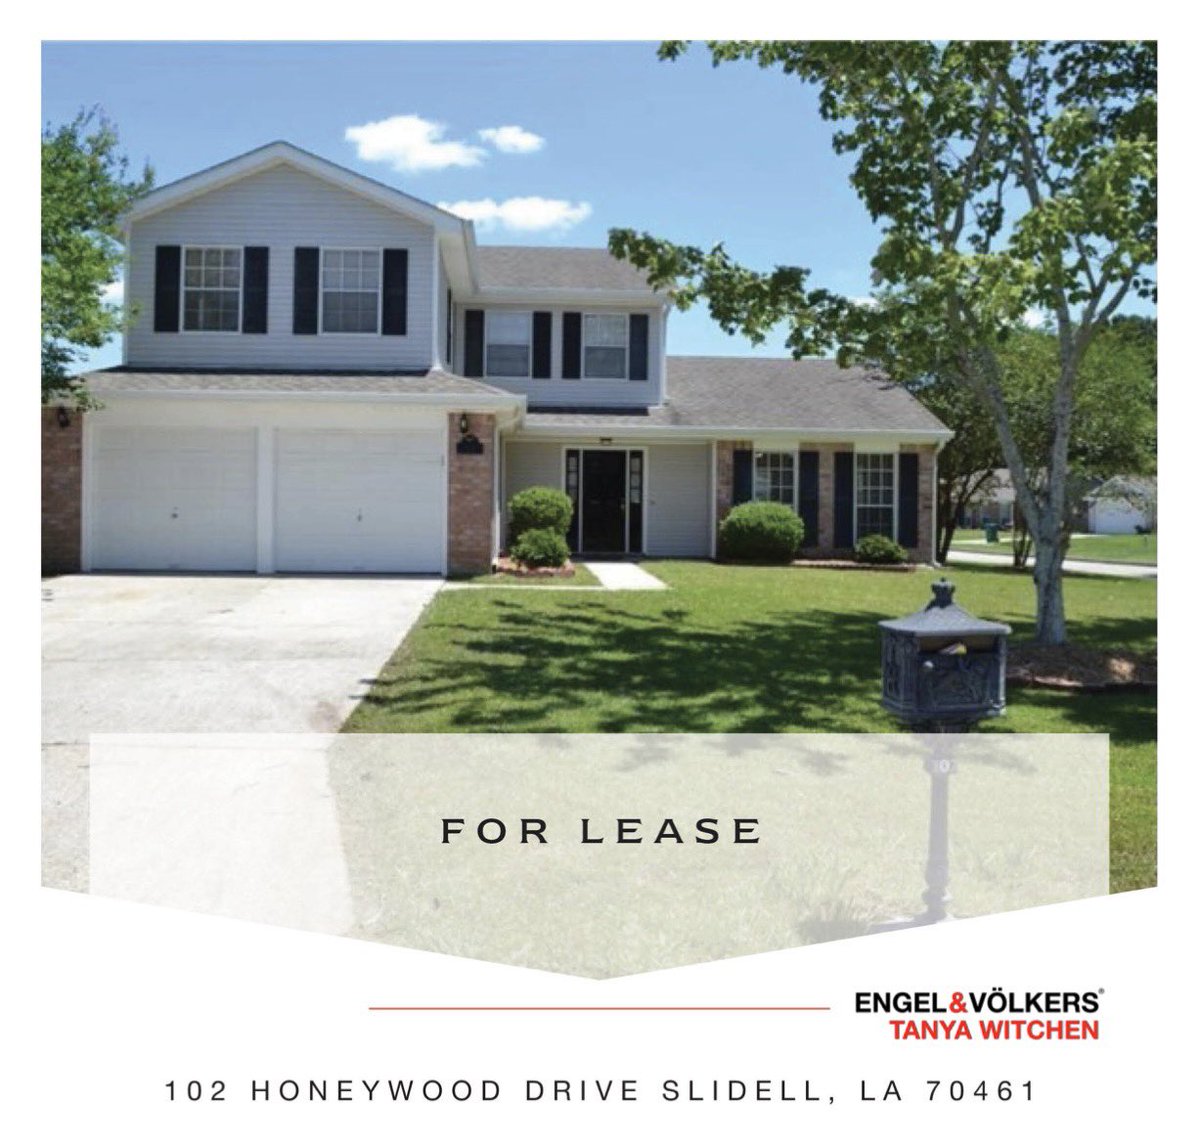 Fantastic property #ForLease in #WillowWood!

Contact Tanya K. Witchen to learn more or to schedule a showing!
☎️(985) 264-6025

📲tanyawitchen.evrealestate.com/ListingDetails…

#NewToTheMarket #EngelVölkersSlidellMandeville #SlidellHomesForLease #SlidellRealEstate #NorthshoreRealEstate